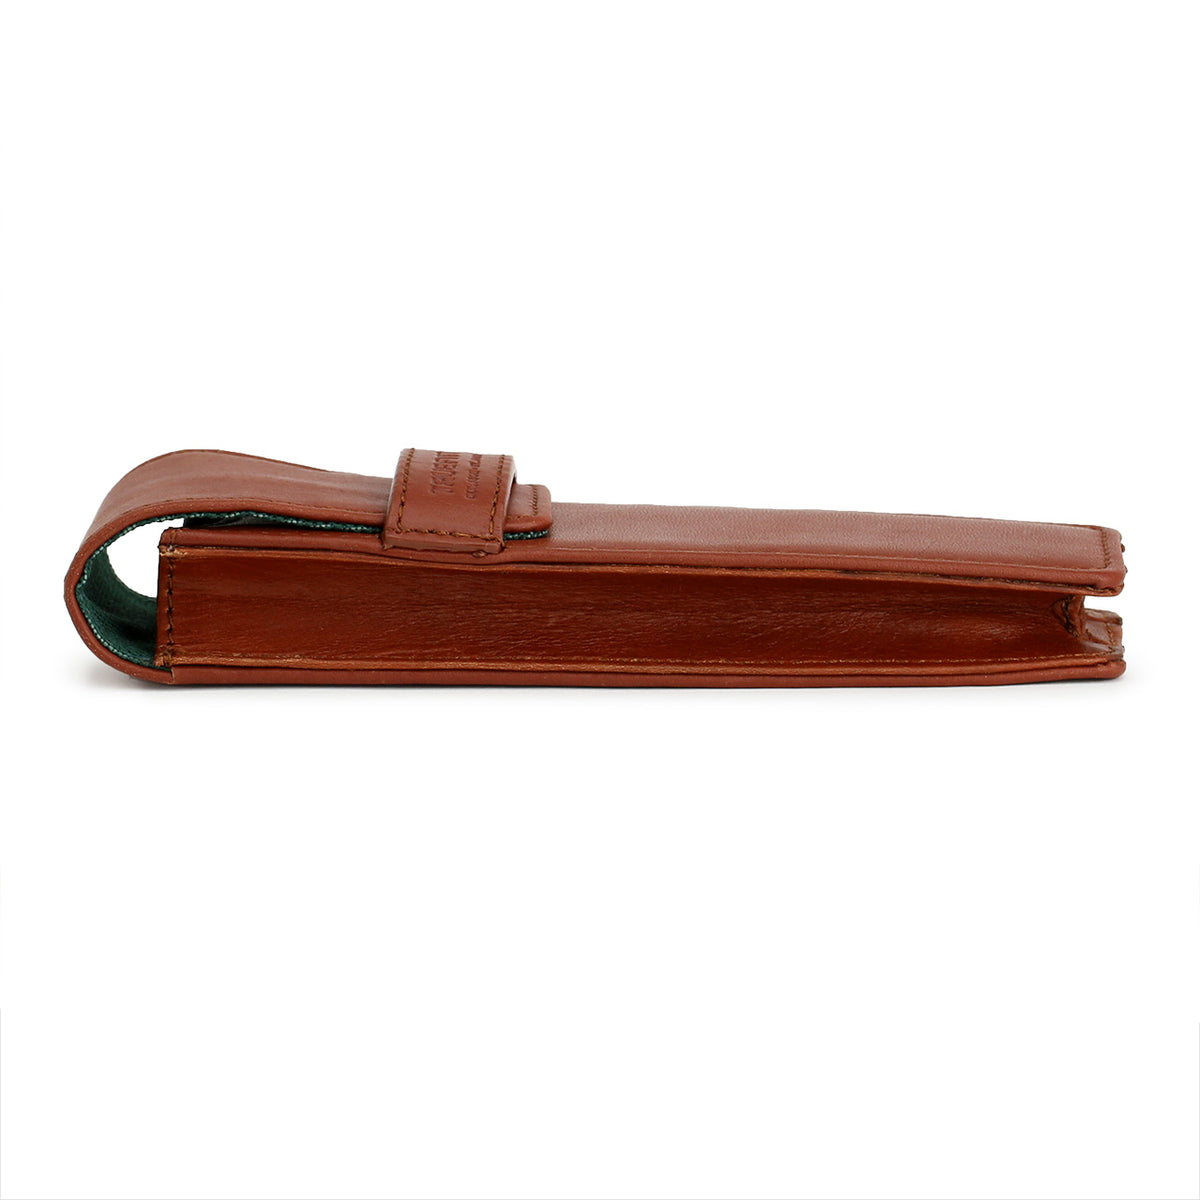 Tan Leather razor case by Truefitt and Hill, side profile showing the tucked cover